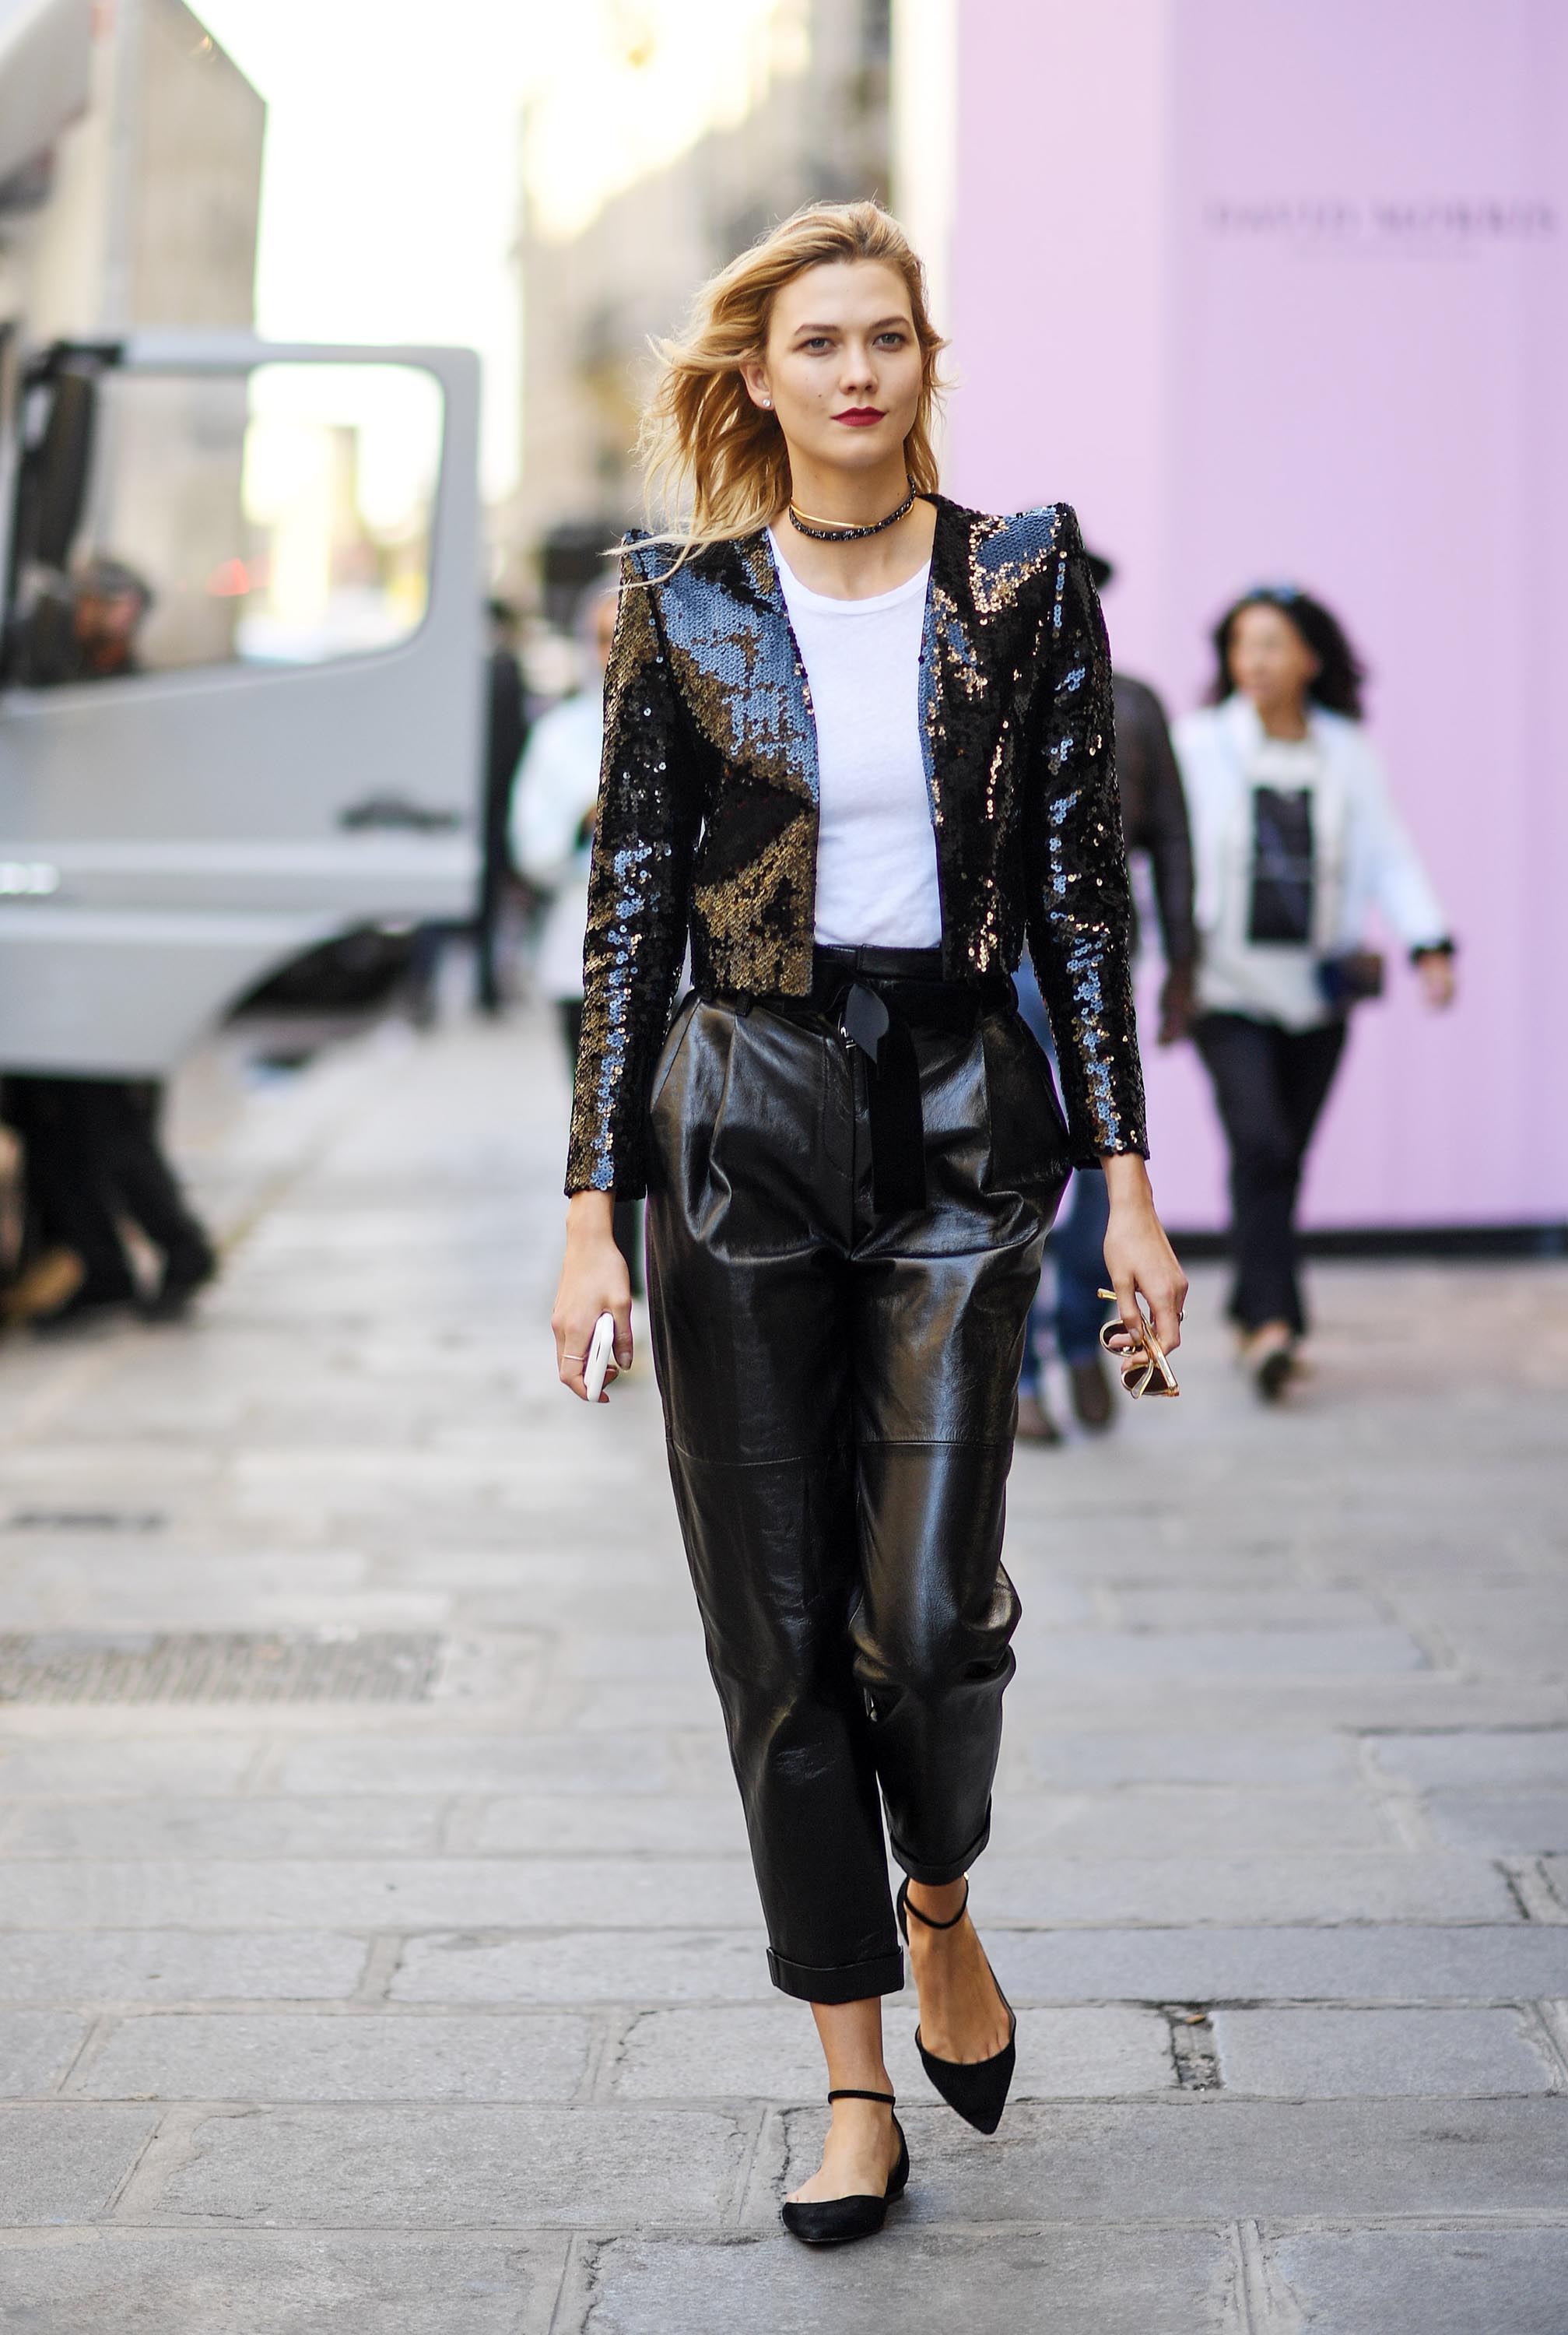 Karlie Kloss out and about in Paris